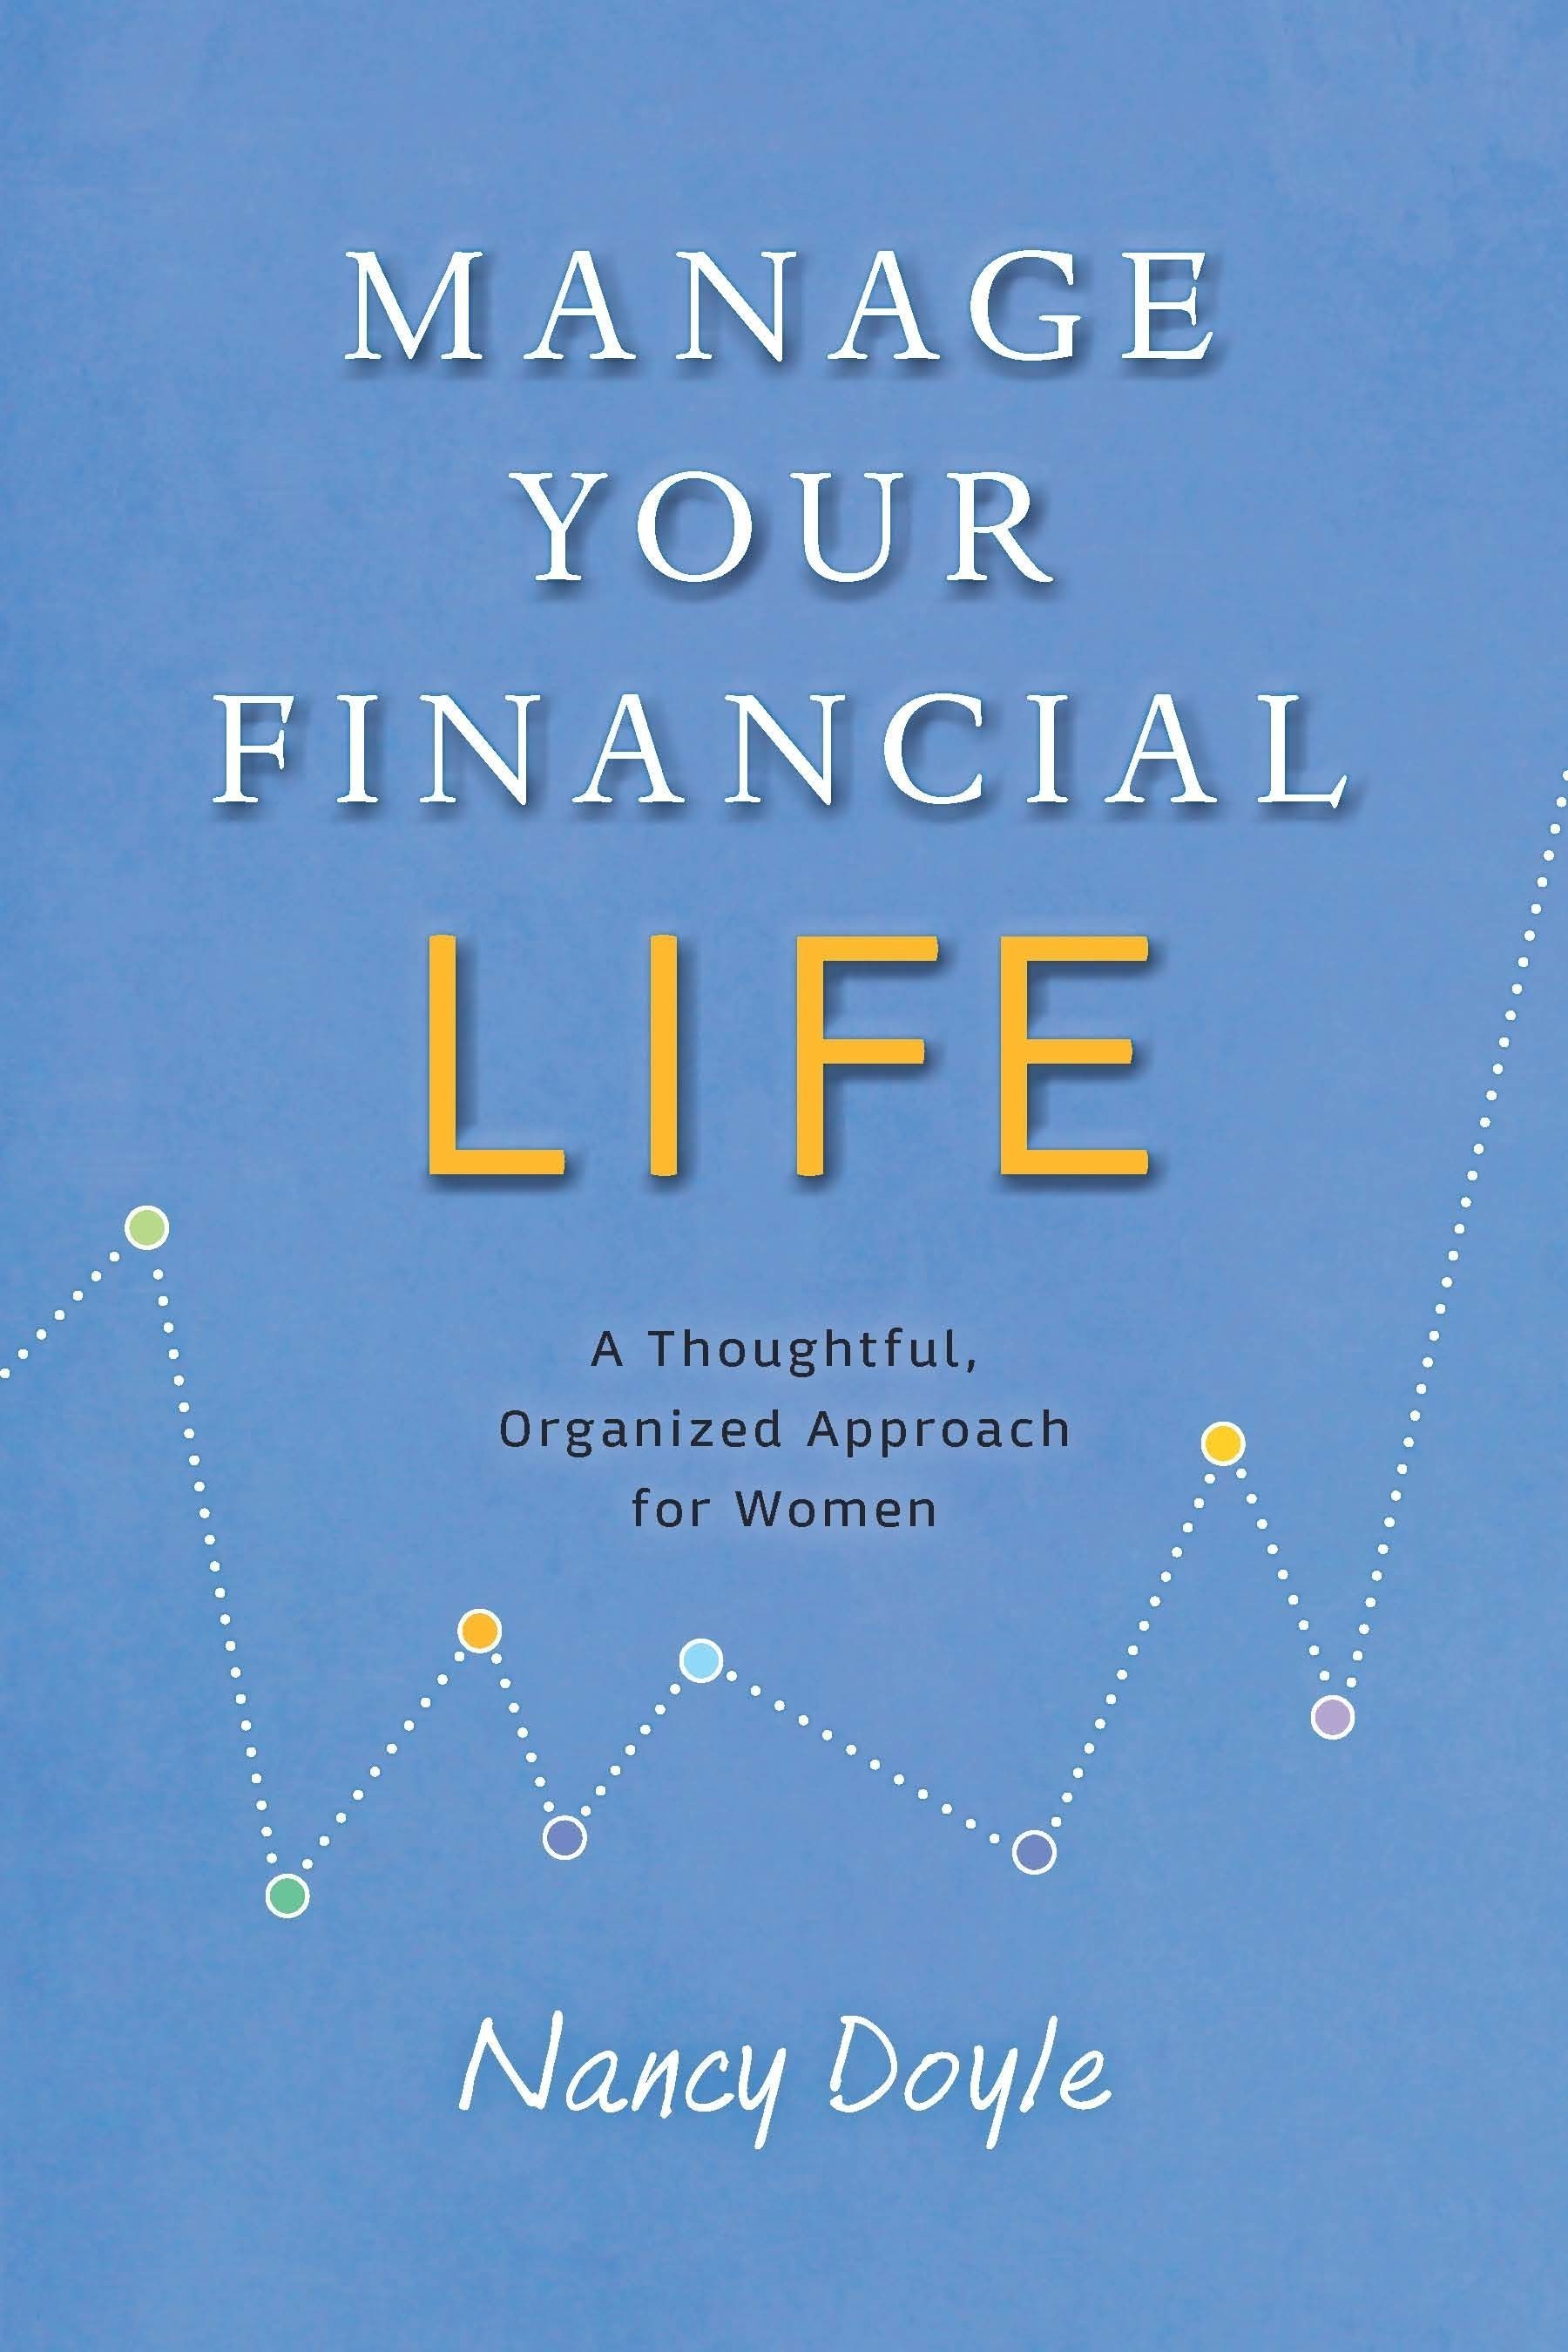 *Manage Your Financial Life* by consultant Nancy Doyle is a comprehensive and approachable guide to give women confidence to manage their financial affairs. Doyle's straightforward approach has four main steps: Get Organized; Analyze your Financial Profile; Educate Yourself About Investing; and Invest Your Money.